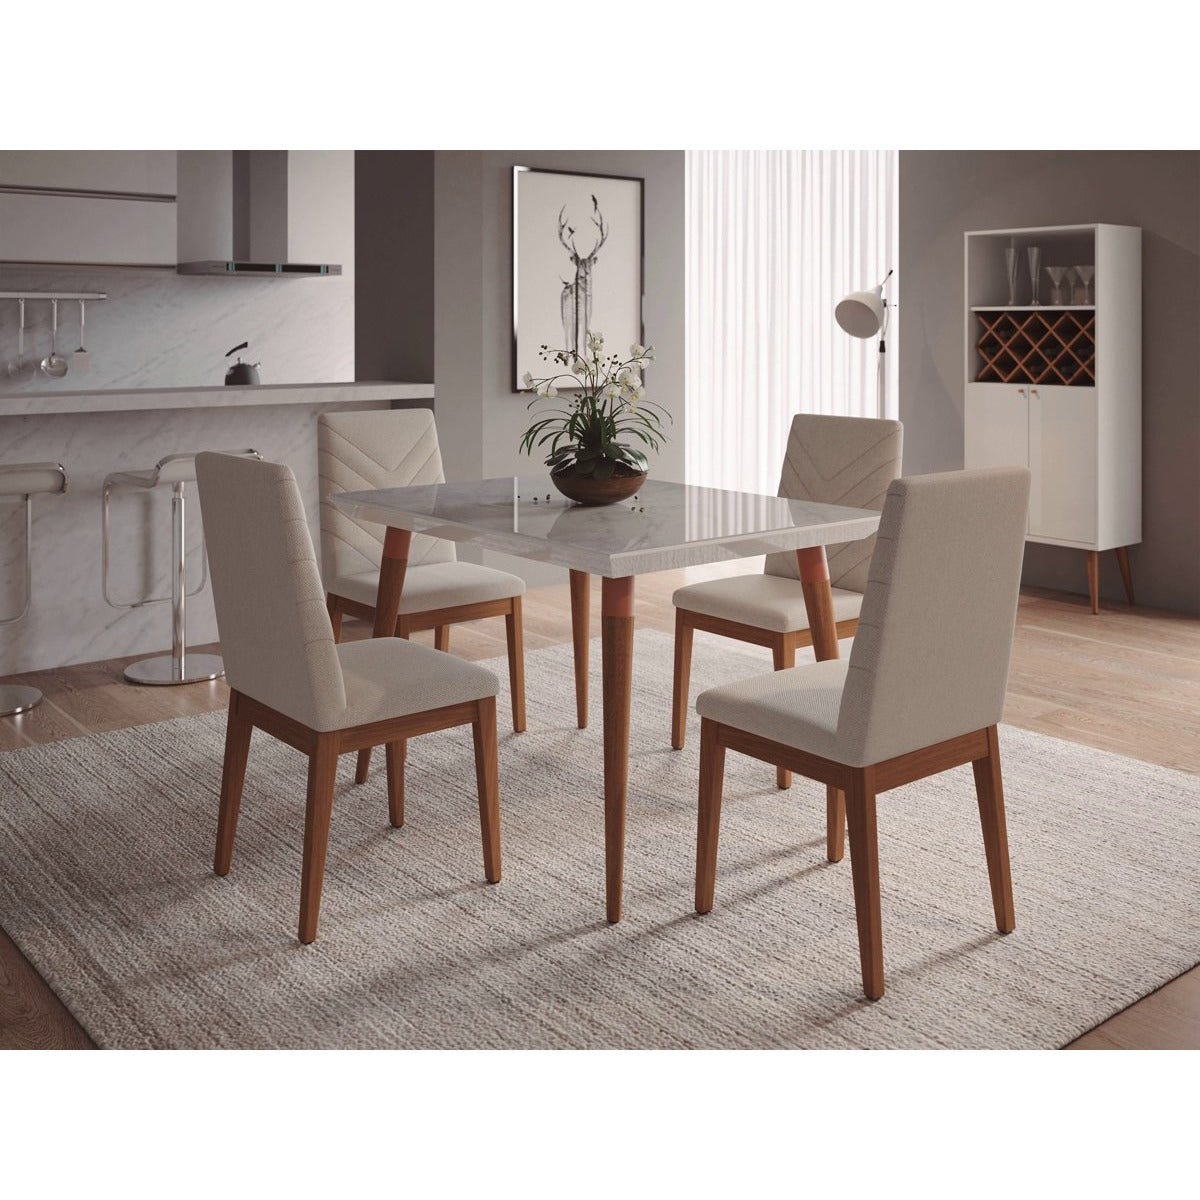 Manhattan Comfort 5-Piece Utopia 47.24" and Catherine Dining Set with 4 Dining Chairs in White Gloss Marble and Beige-Minimal & Modern